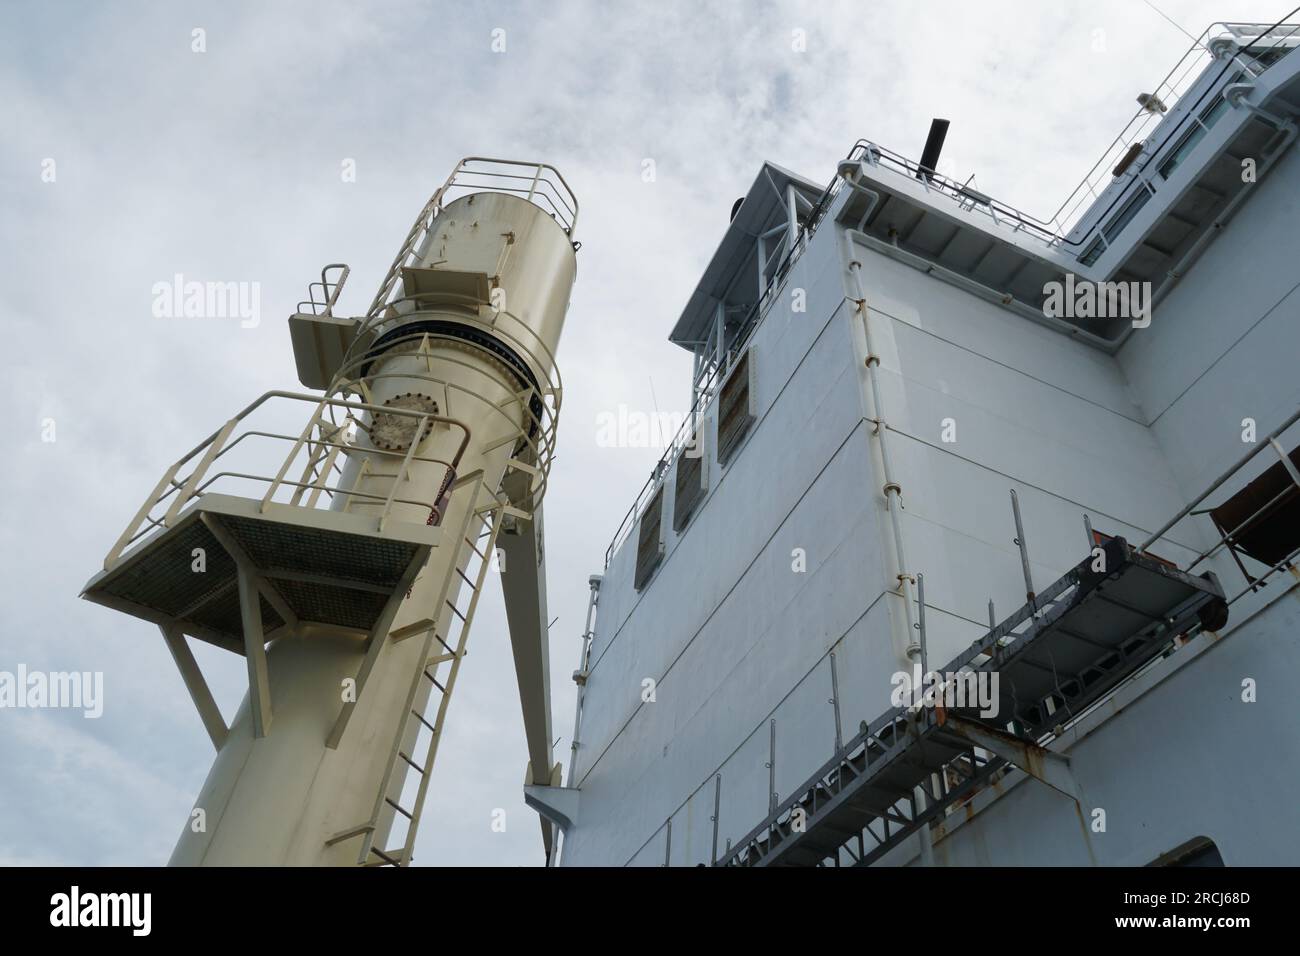 Aft part of white superstructure and cream cargo crane of container vessel observed from main deck. Stock Photo